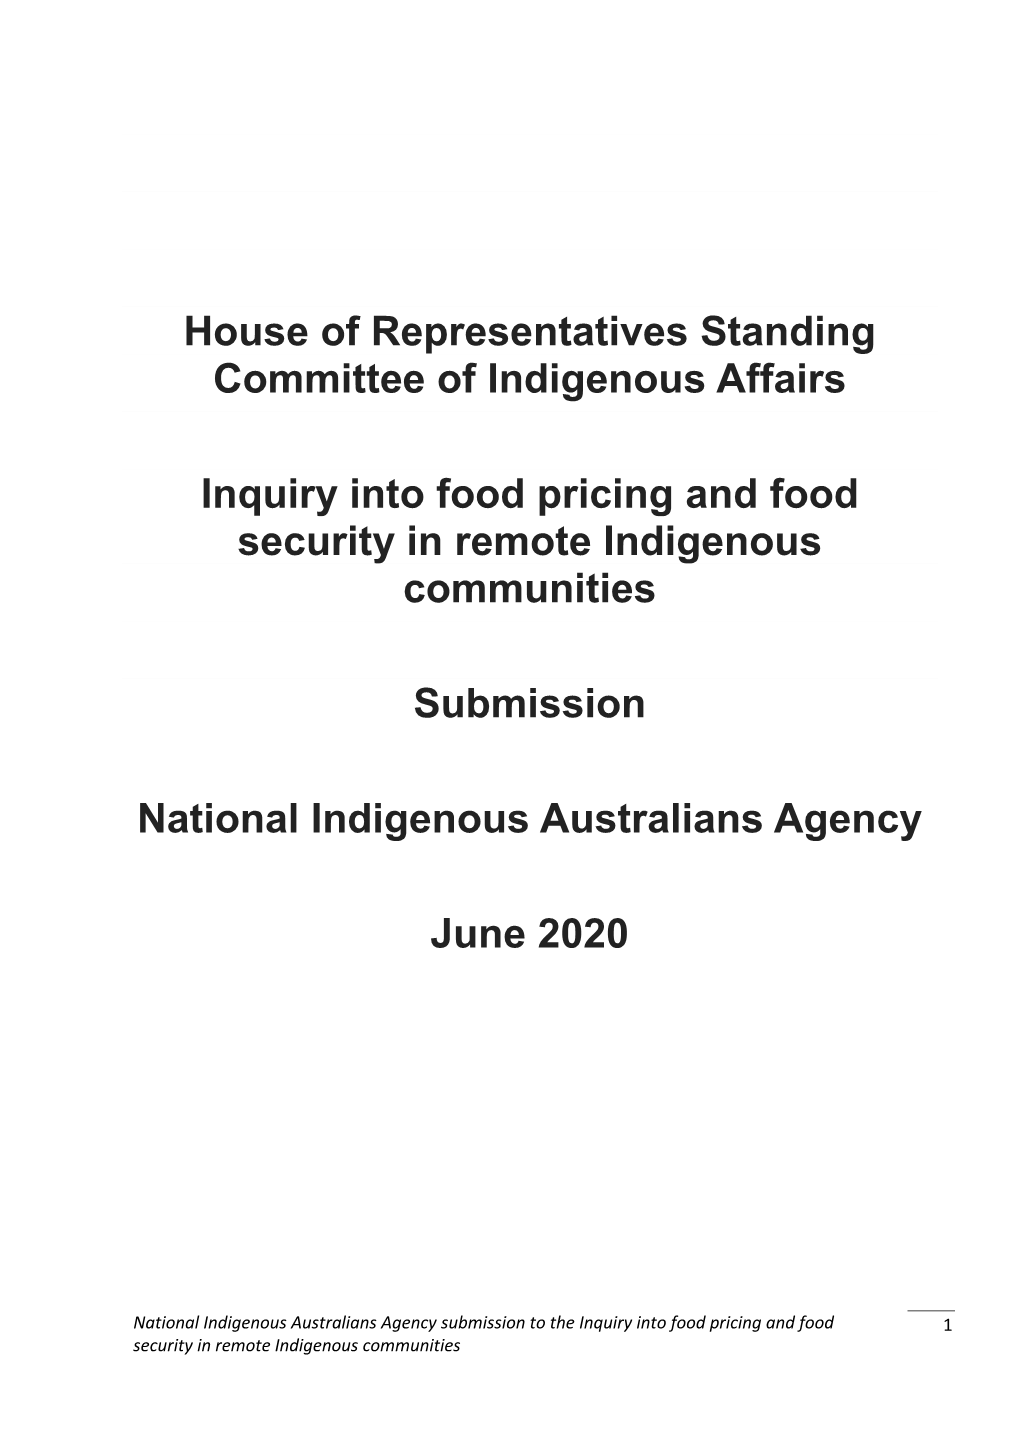 House of Representatives Standing Committee of Indigenous Affairs